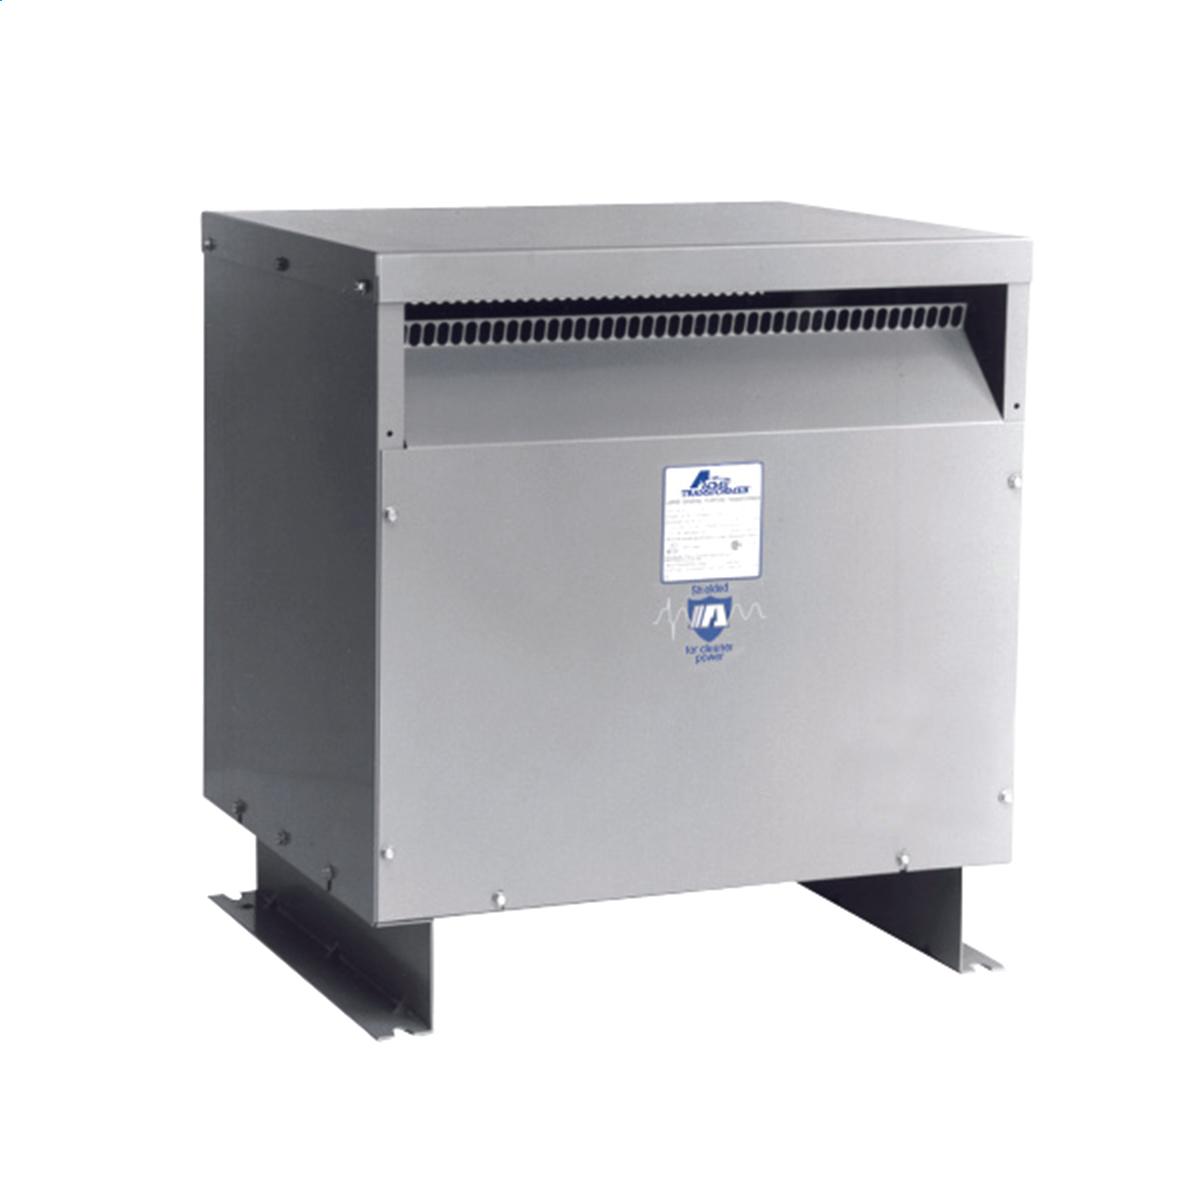 Hubbell WI045K22 Medium Voltage Transformer - Three Phase, 4800Δ - 208Y//120V, 45kVA  ; Lower operating cost over Liquid-filled ; No additional fireproofing or venting ; Long life expectancy ; Smaller, lighter easy to maintain